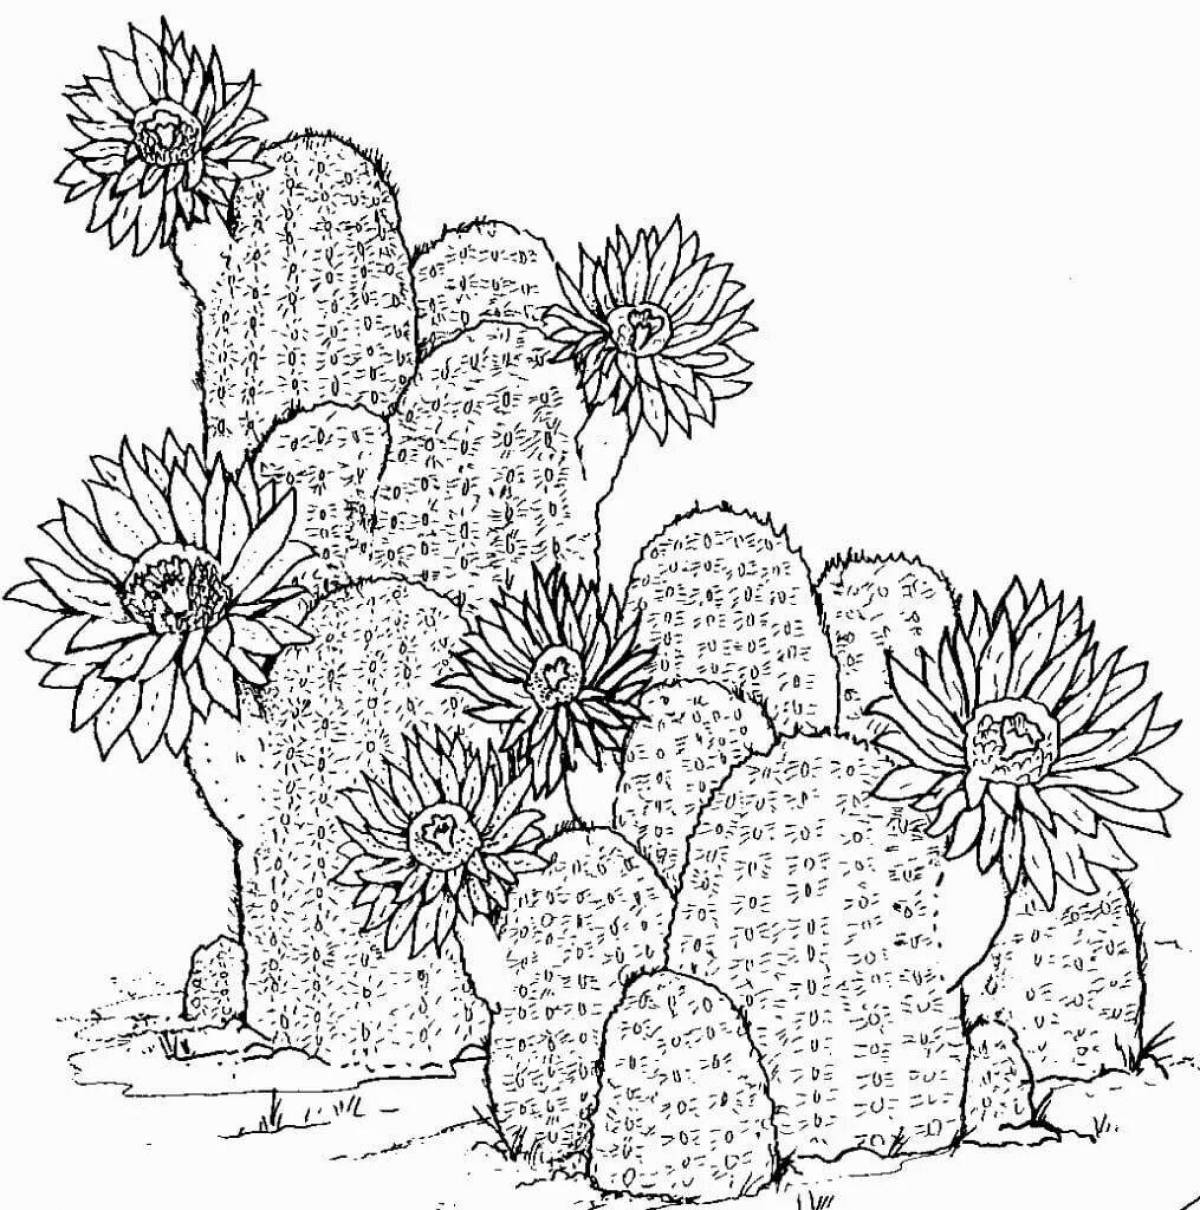 Outstanding cactus coloring page for kids